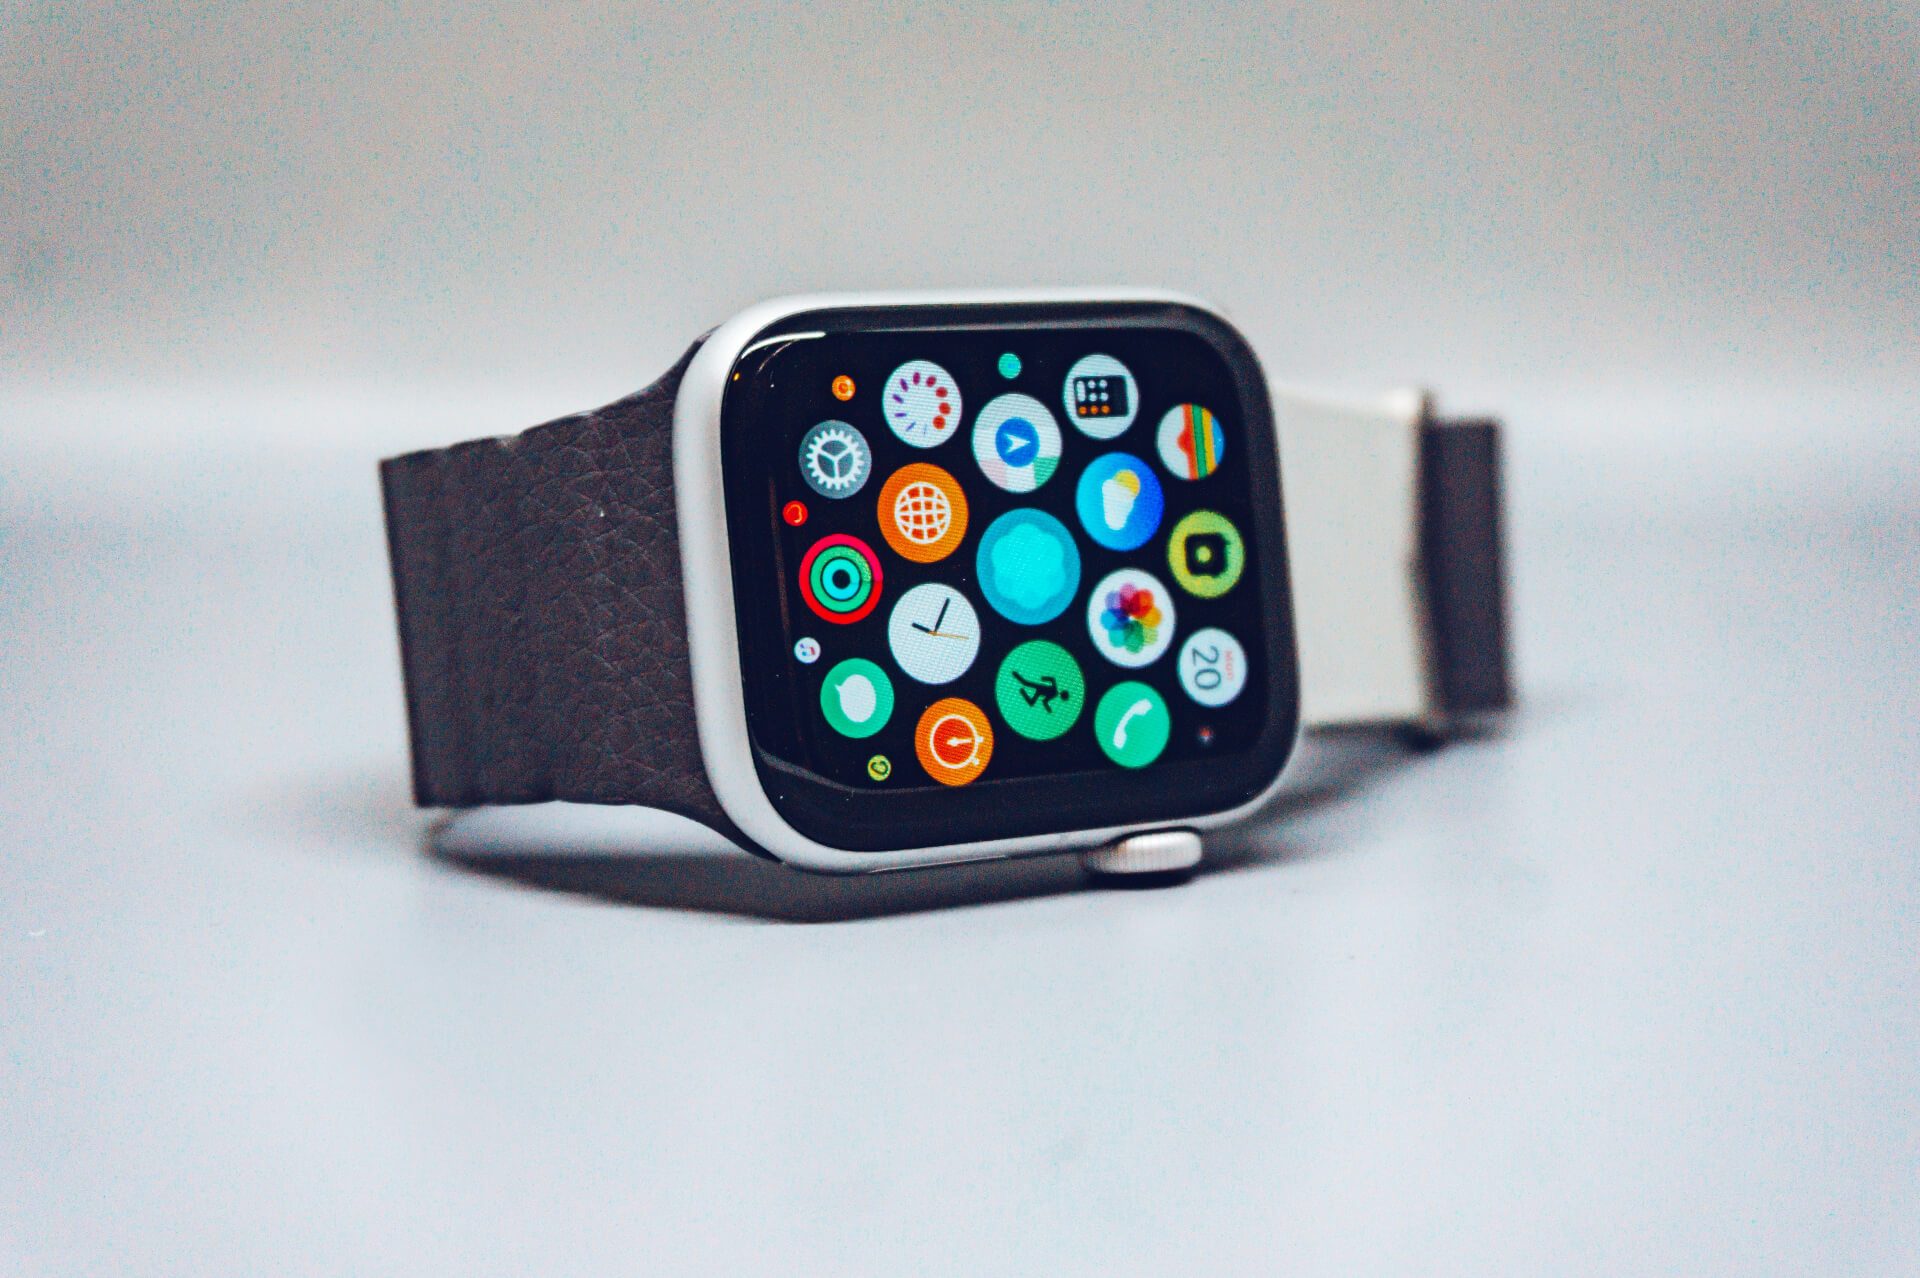 Supply Chain of Apple Watch Under Investigation for Illegal Student Labor